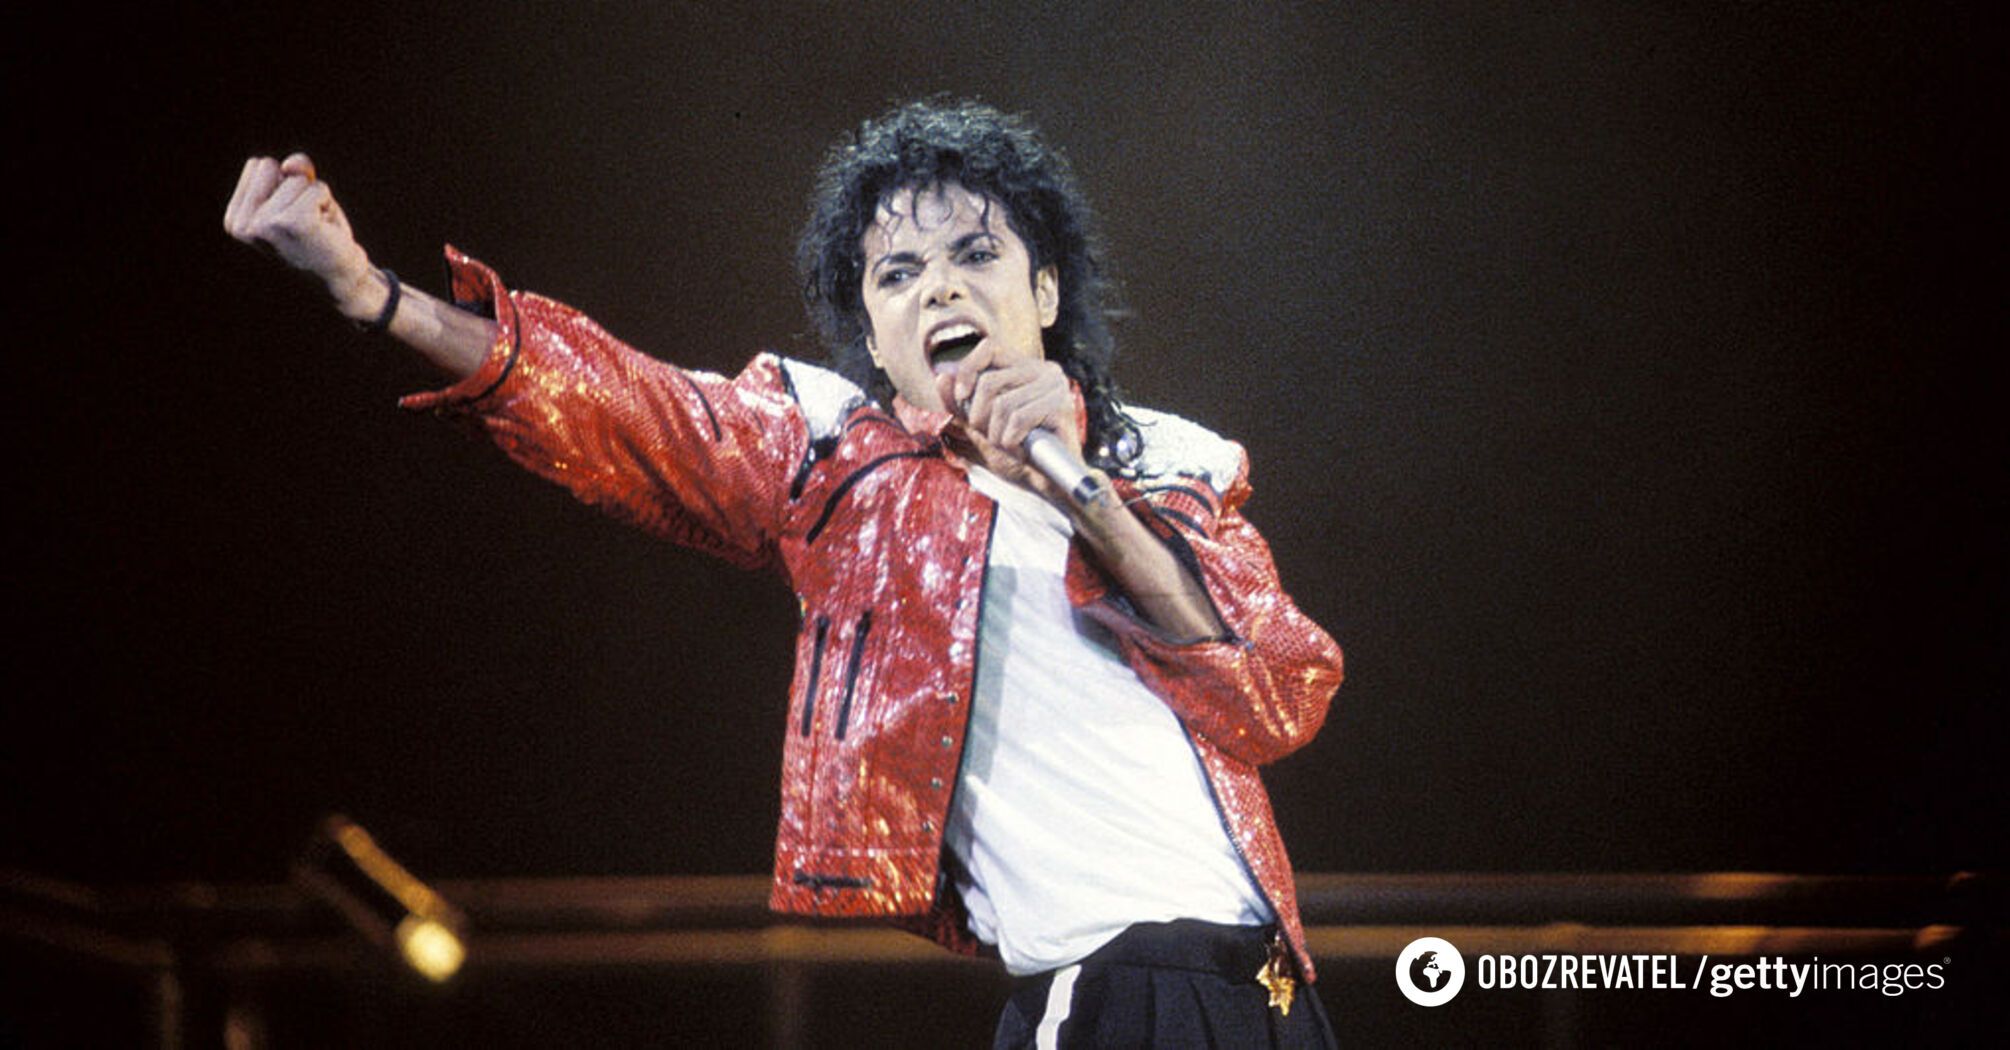 The fight against insomnia killed the legend: the last hours of Michael Jackson's life became known